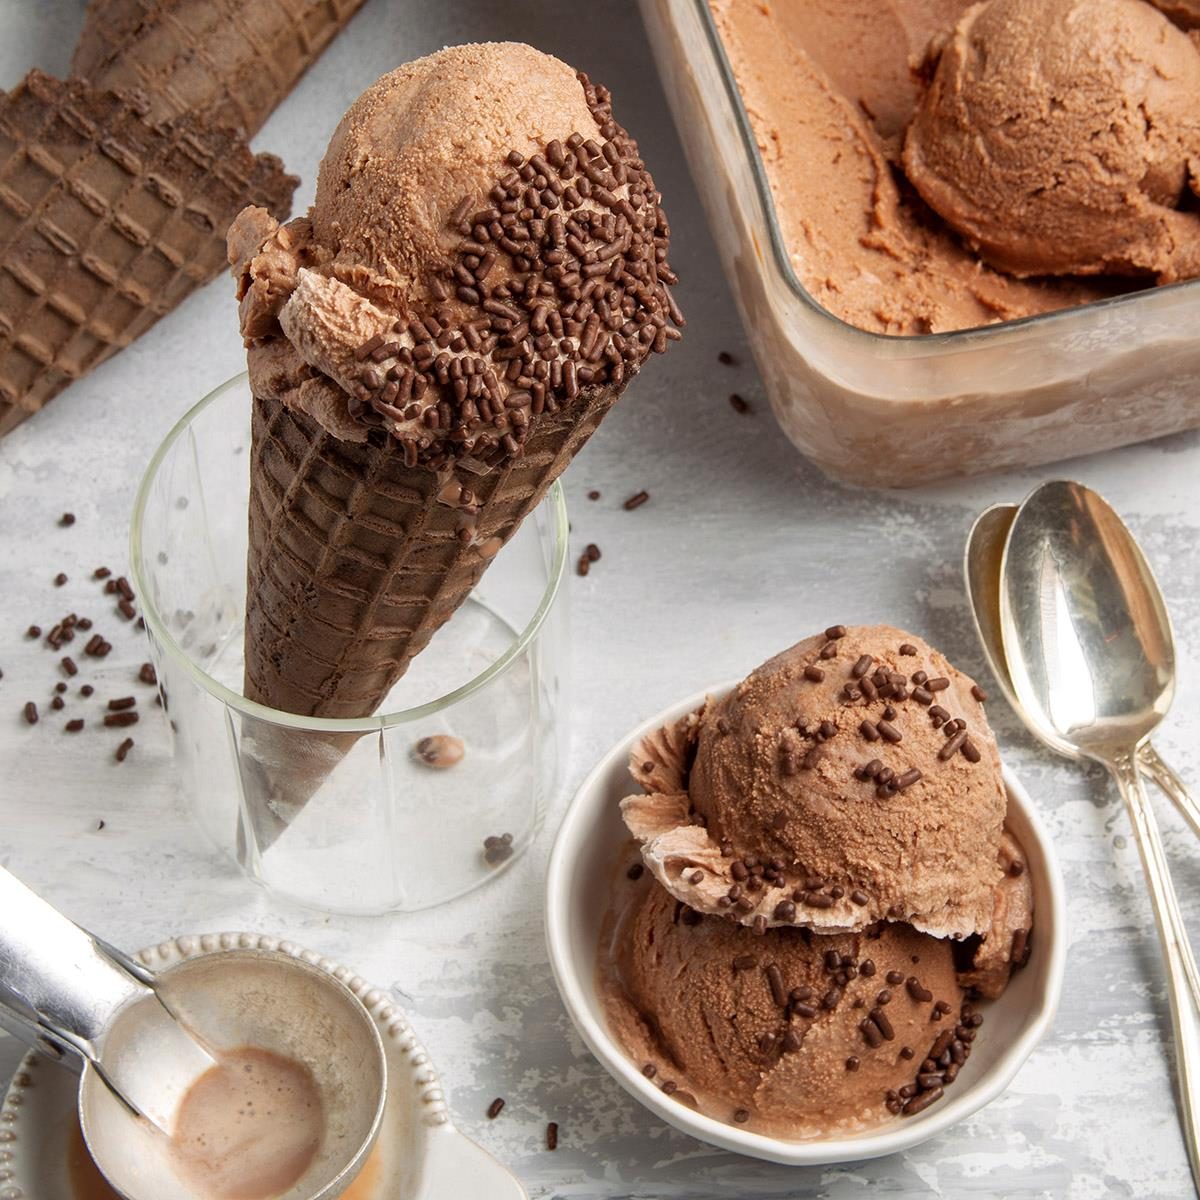 https://www.tasteofhome.com/wp-content/uploads/2018/01/Easy-Chocolate-Ice-Cream_EXPS_FT21_4798_F_0506_1.jpg?fit=700%2C1024